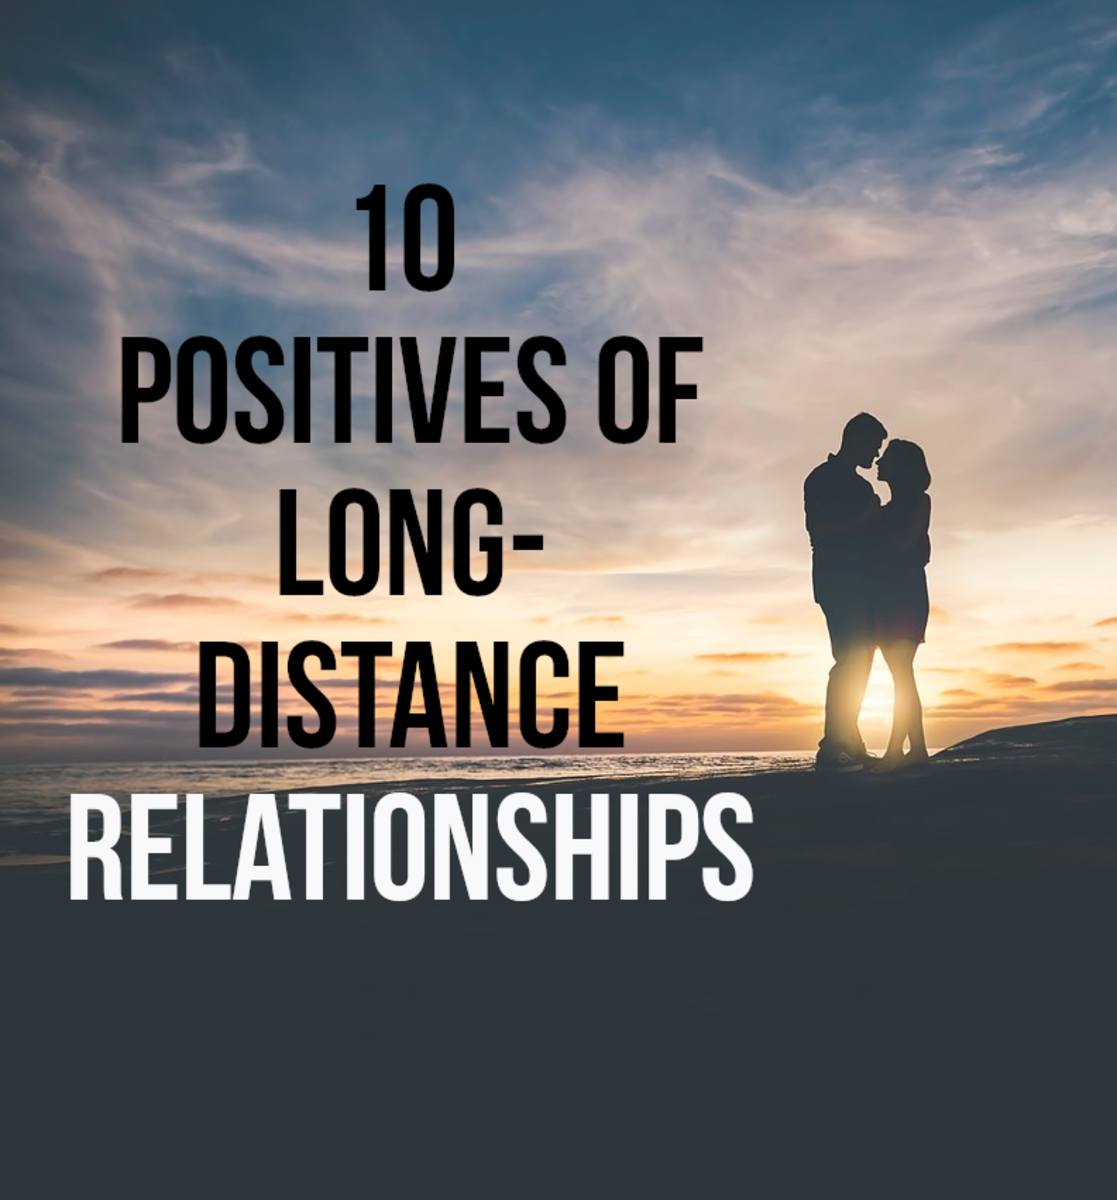 For 10 benefits of long-distance relationships, please read on...